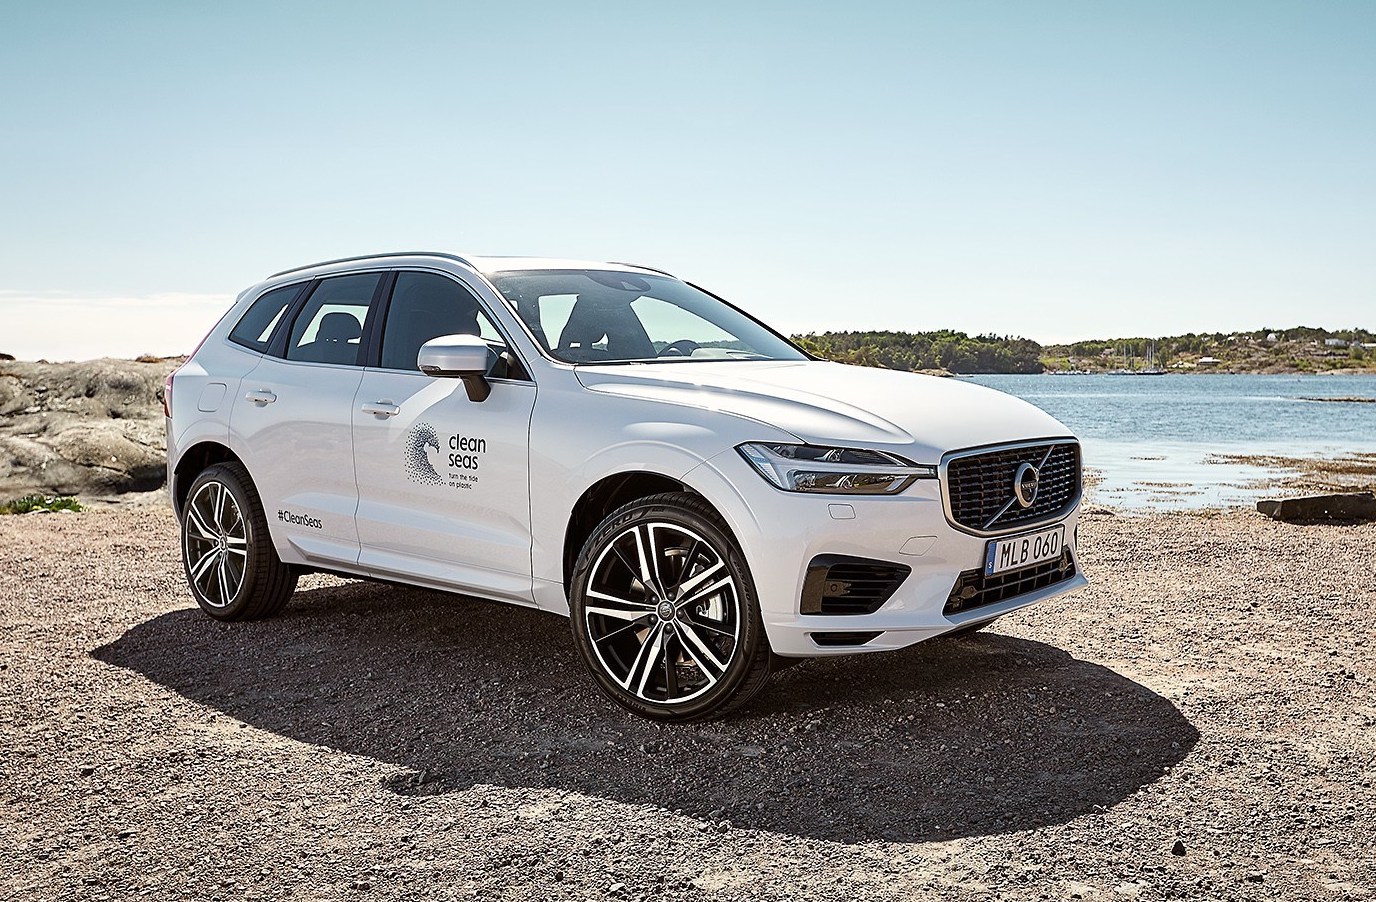 Volvo XC60 T8 with recycled plastic